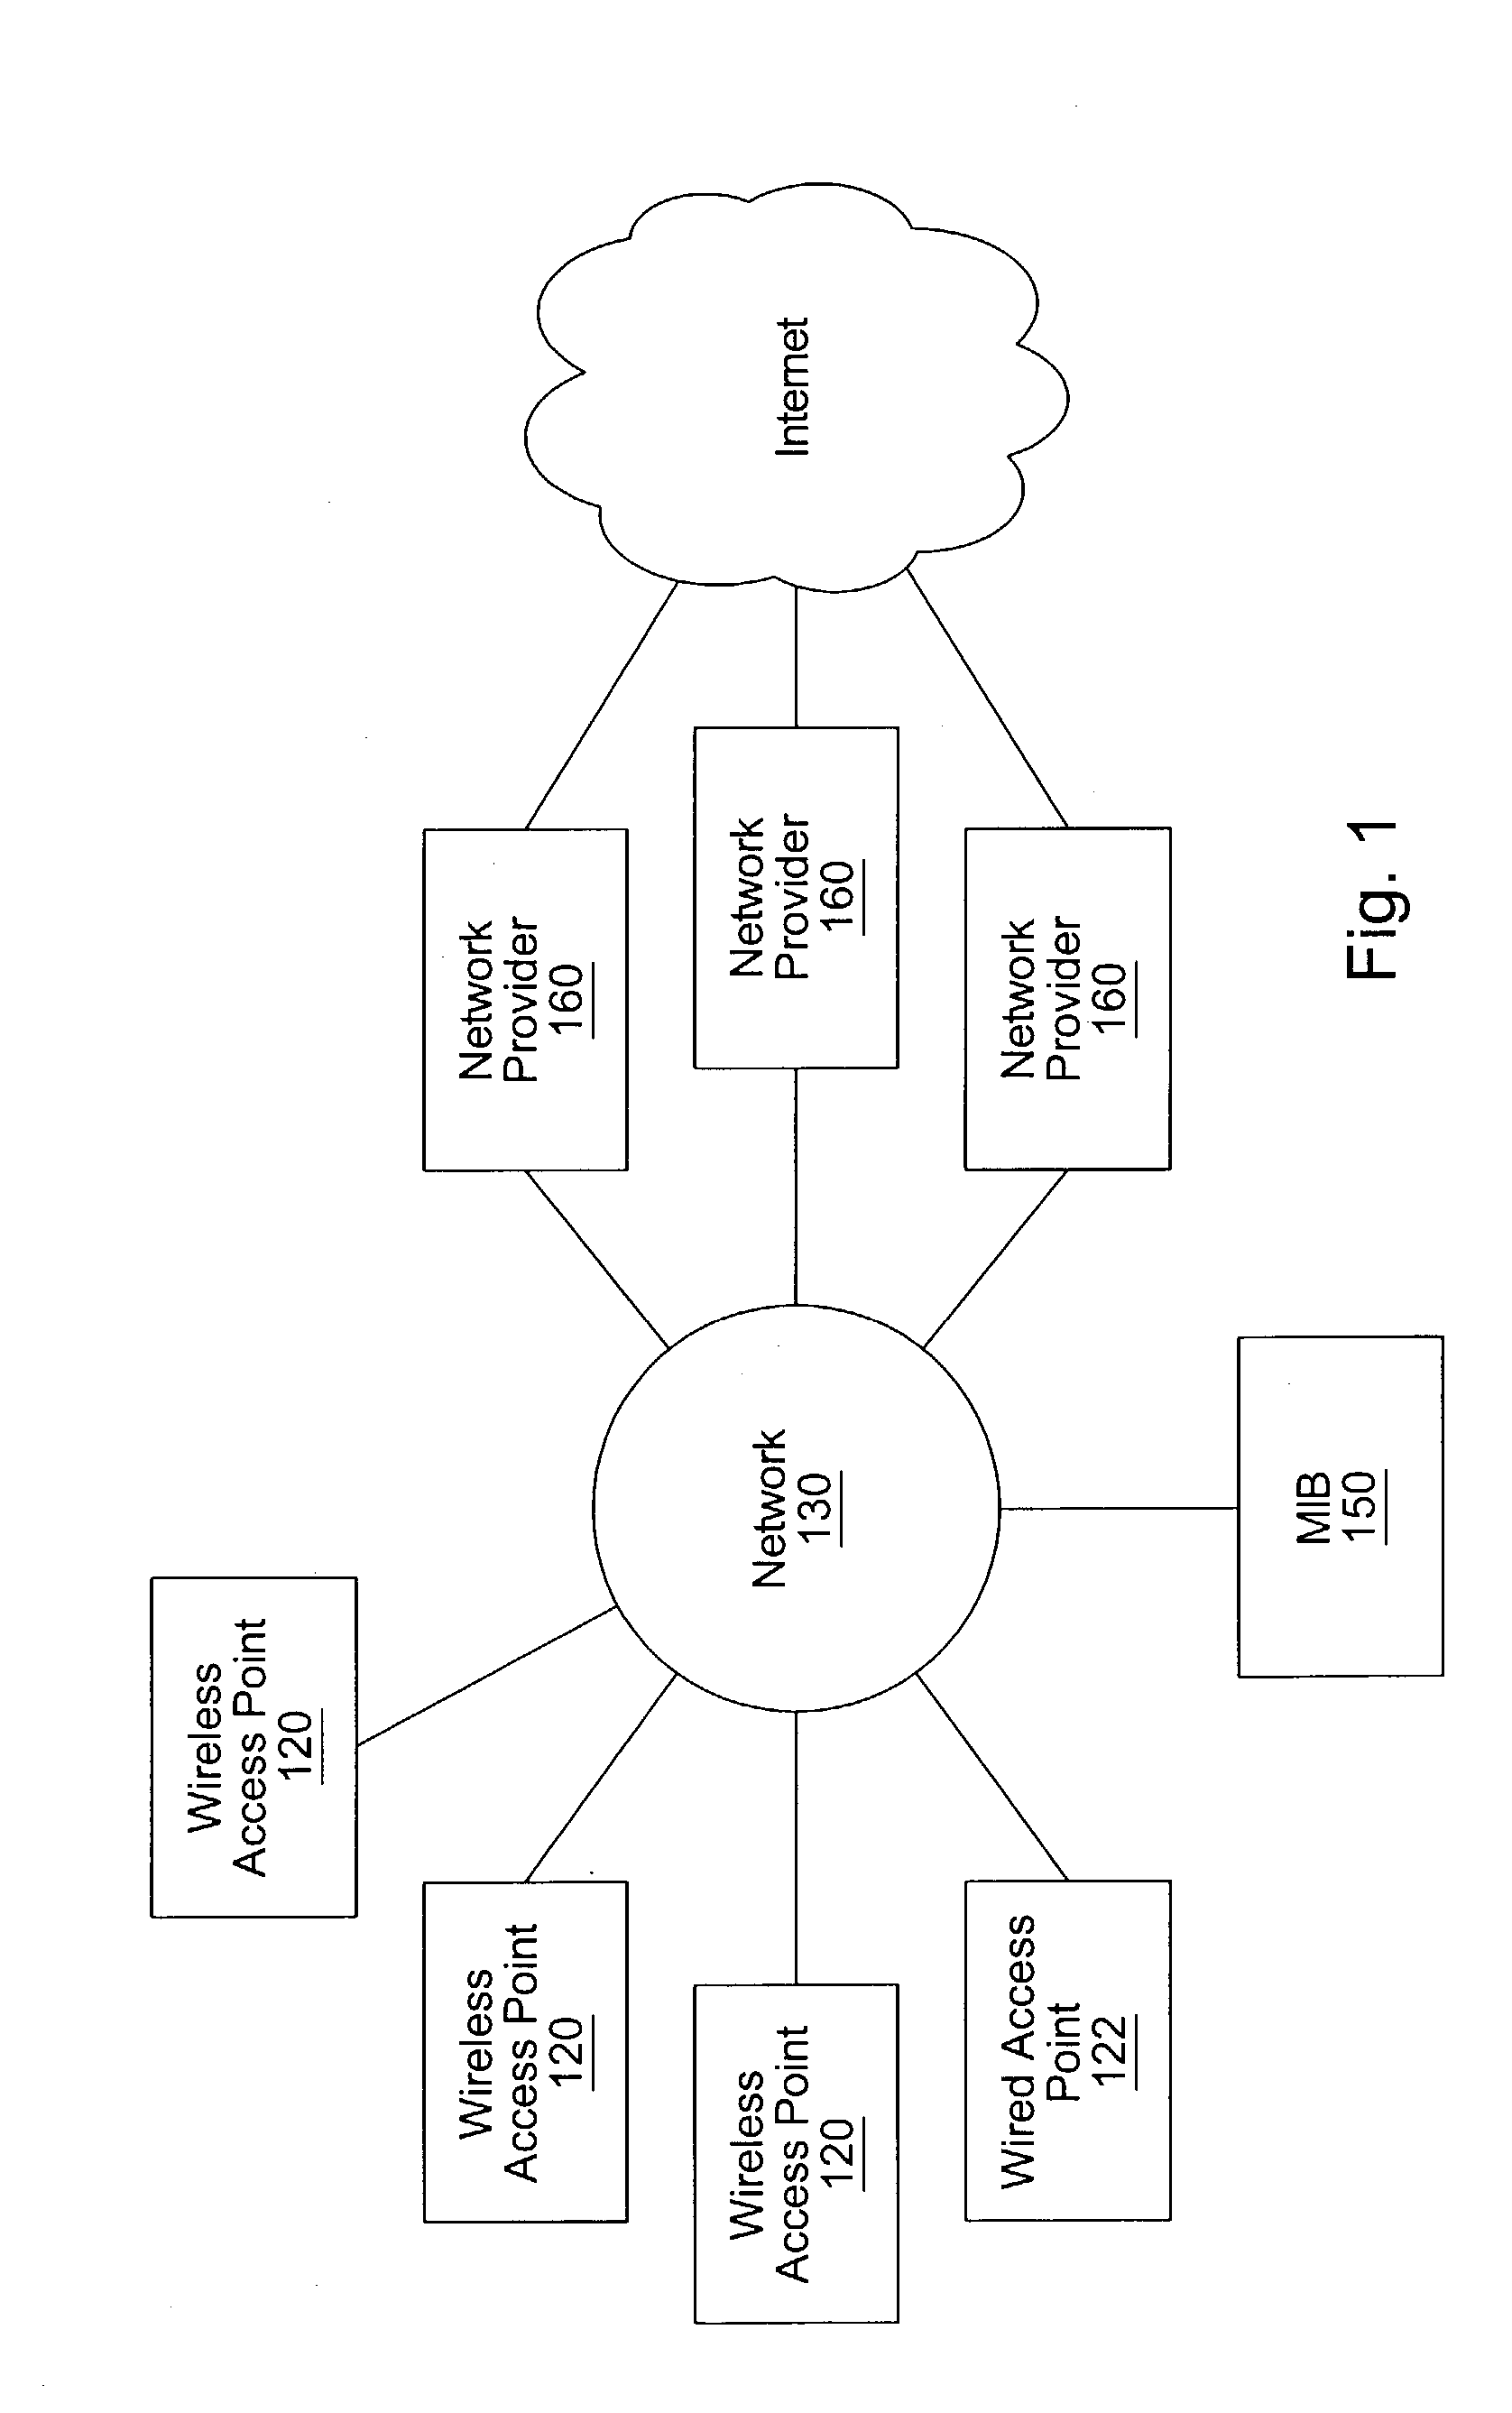 Authorization and authentication of user access to a distributed network communication system with roaming features